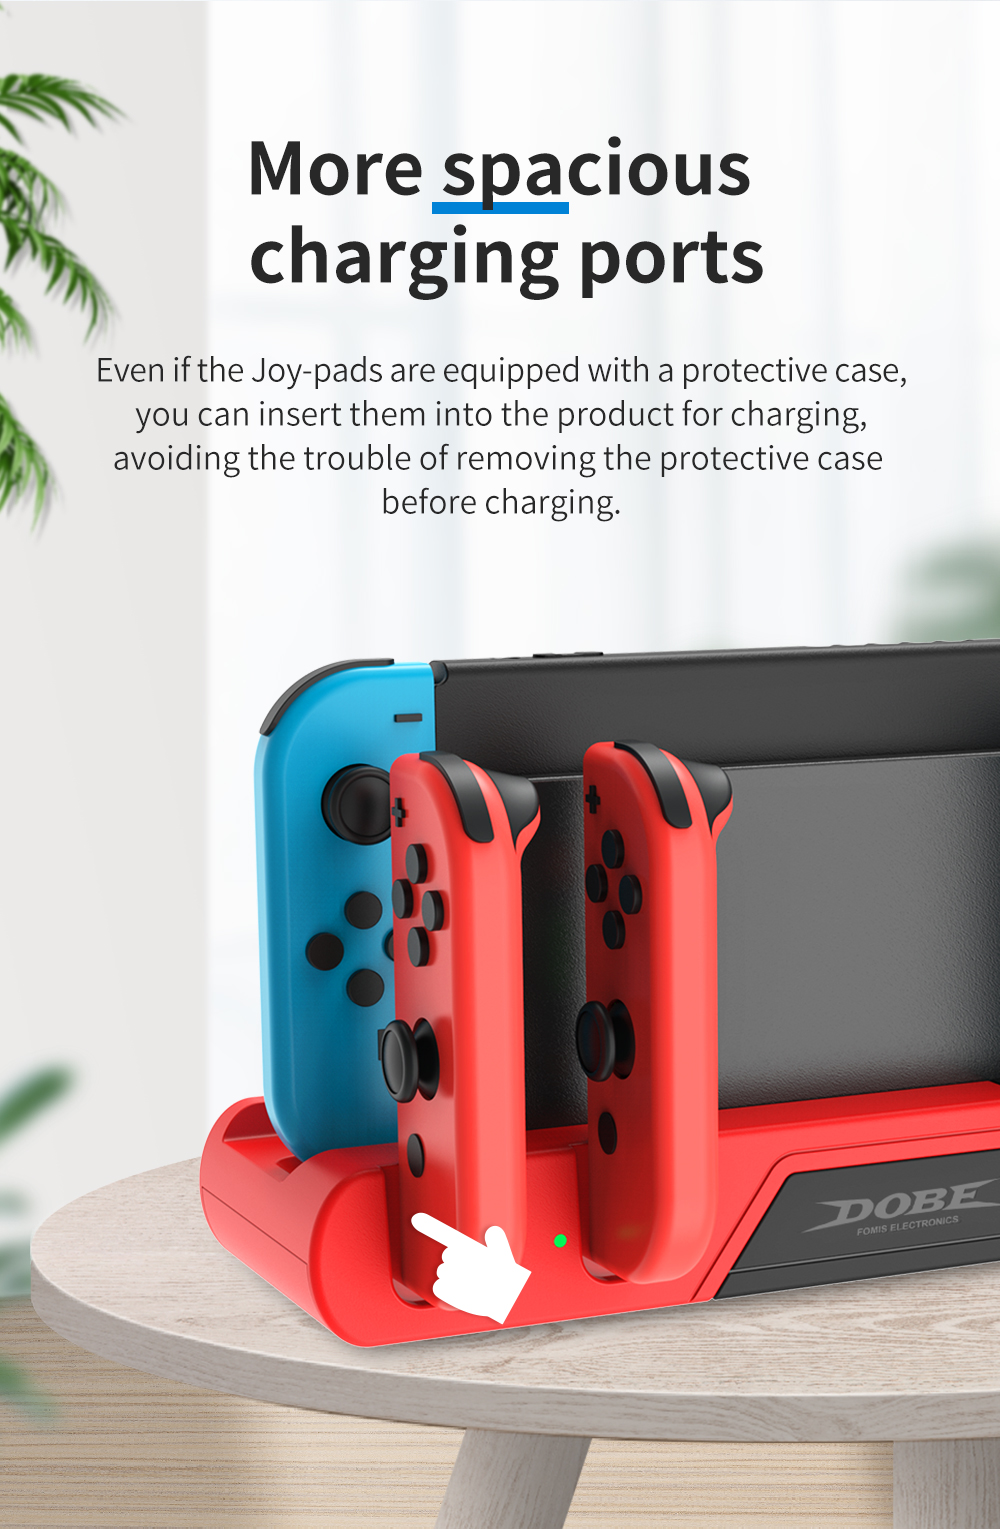 DOBE Charging station Stand For Nintendo Switch